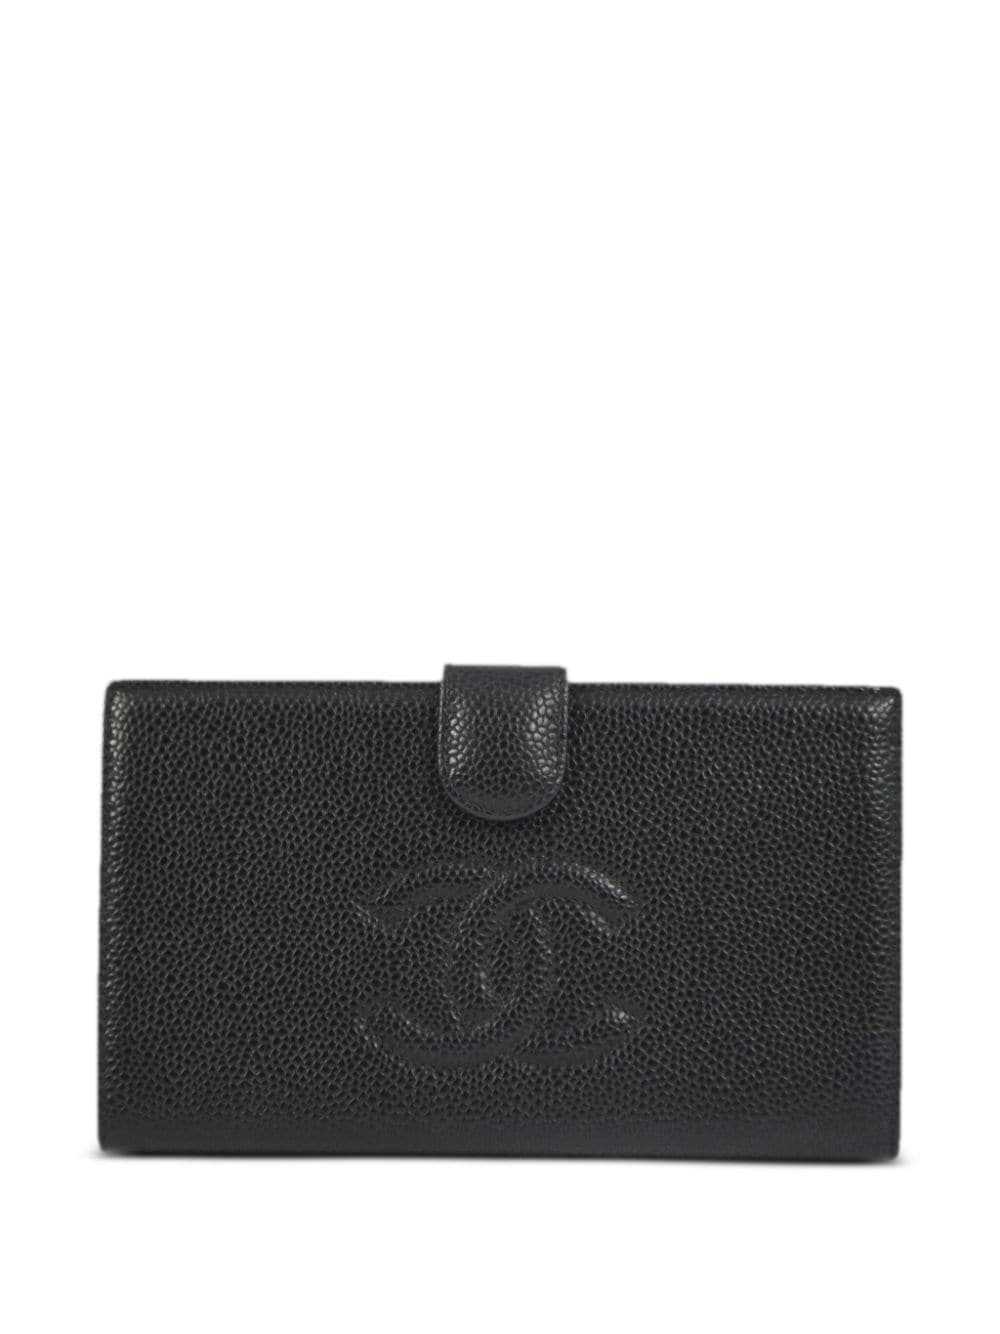 CHANEL Pre-Owned 2006 CC Long leather wallet - Bl… - image 1